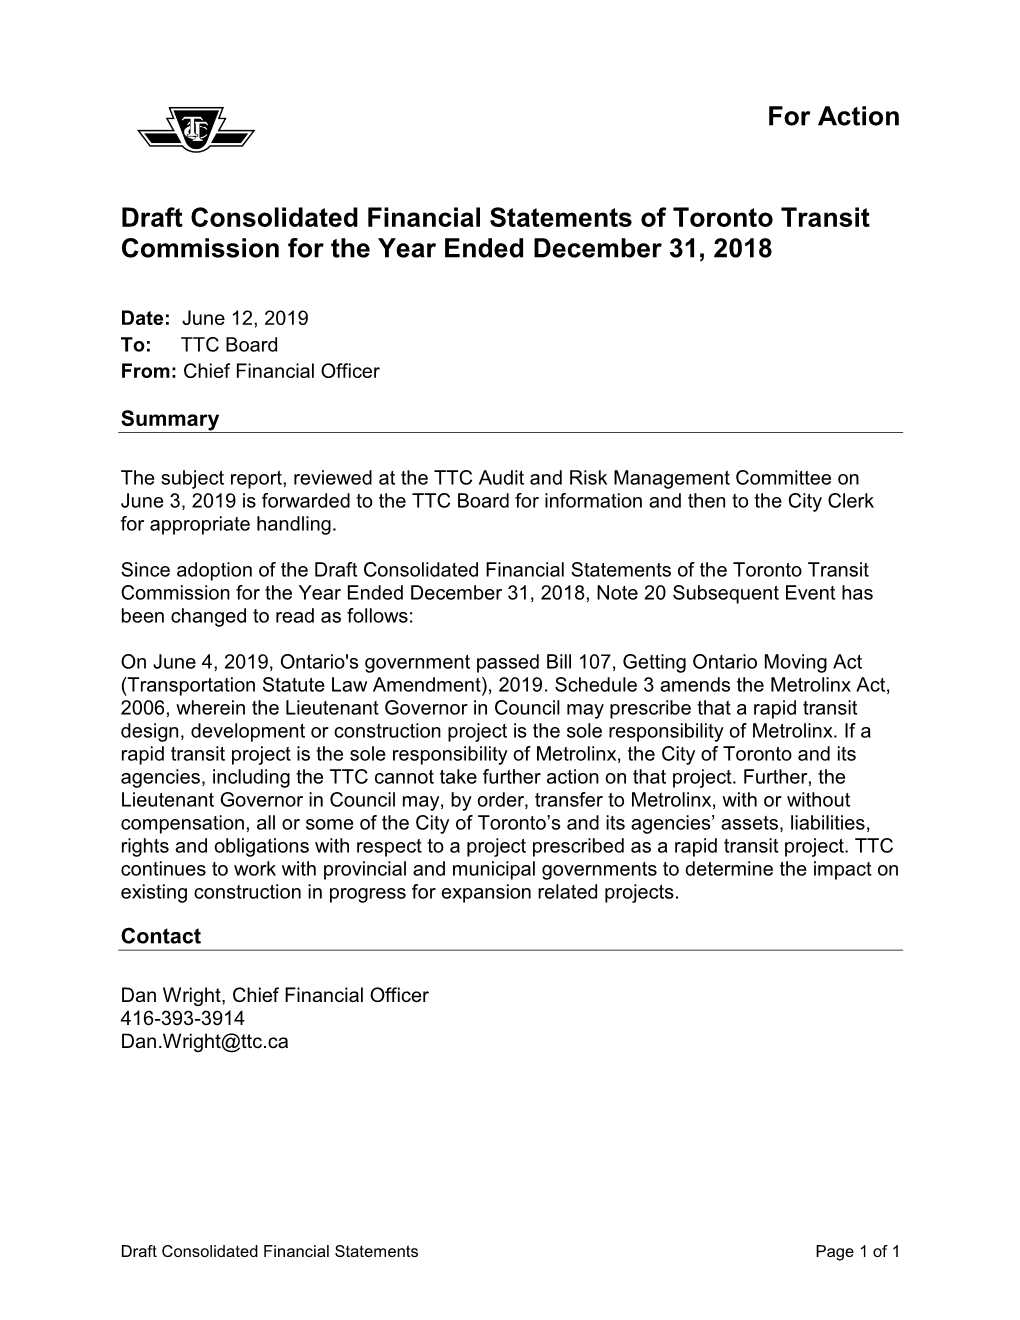 Draft Consolidated Financial Statements of Toronto Transit Commission for the Year Ended December 31, 2018